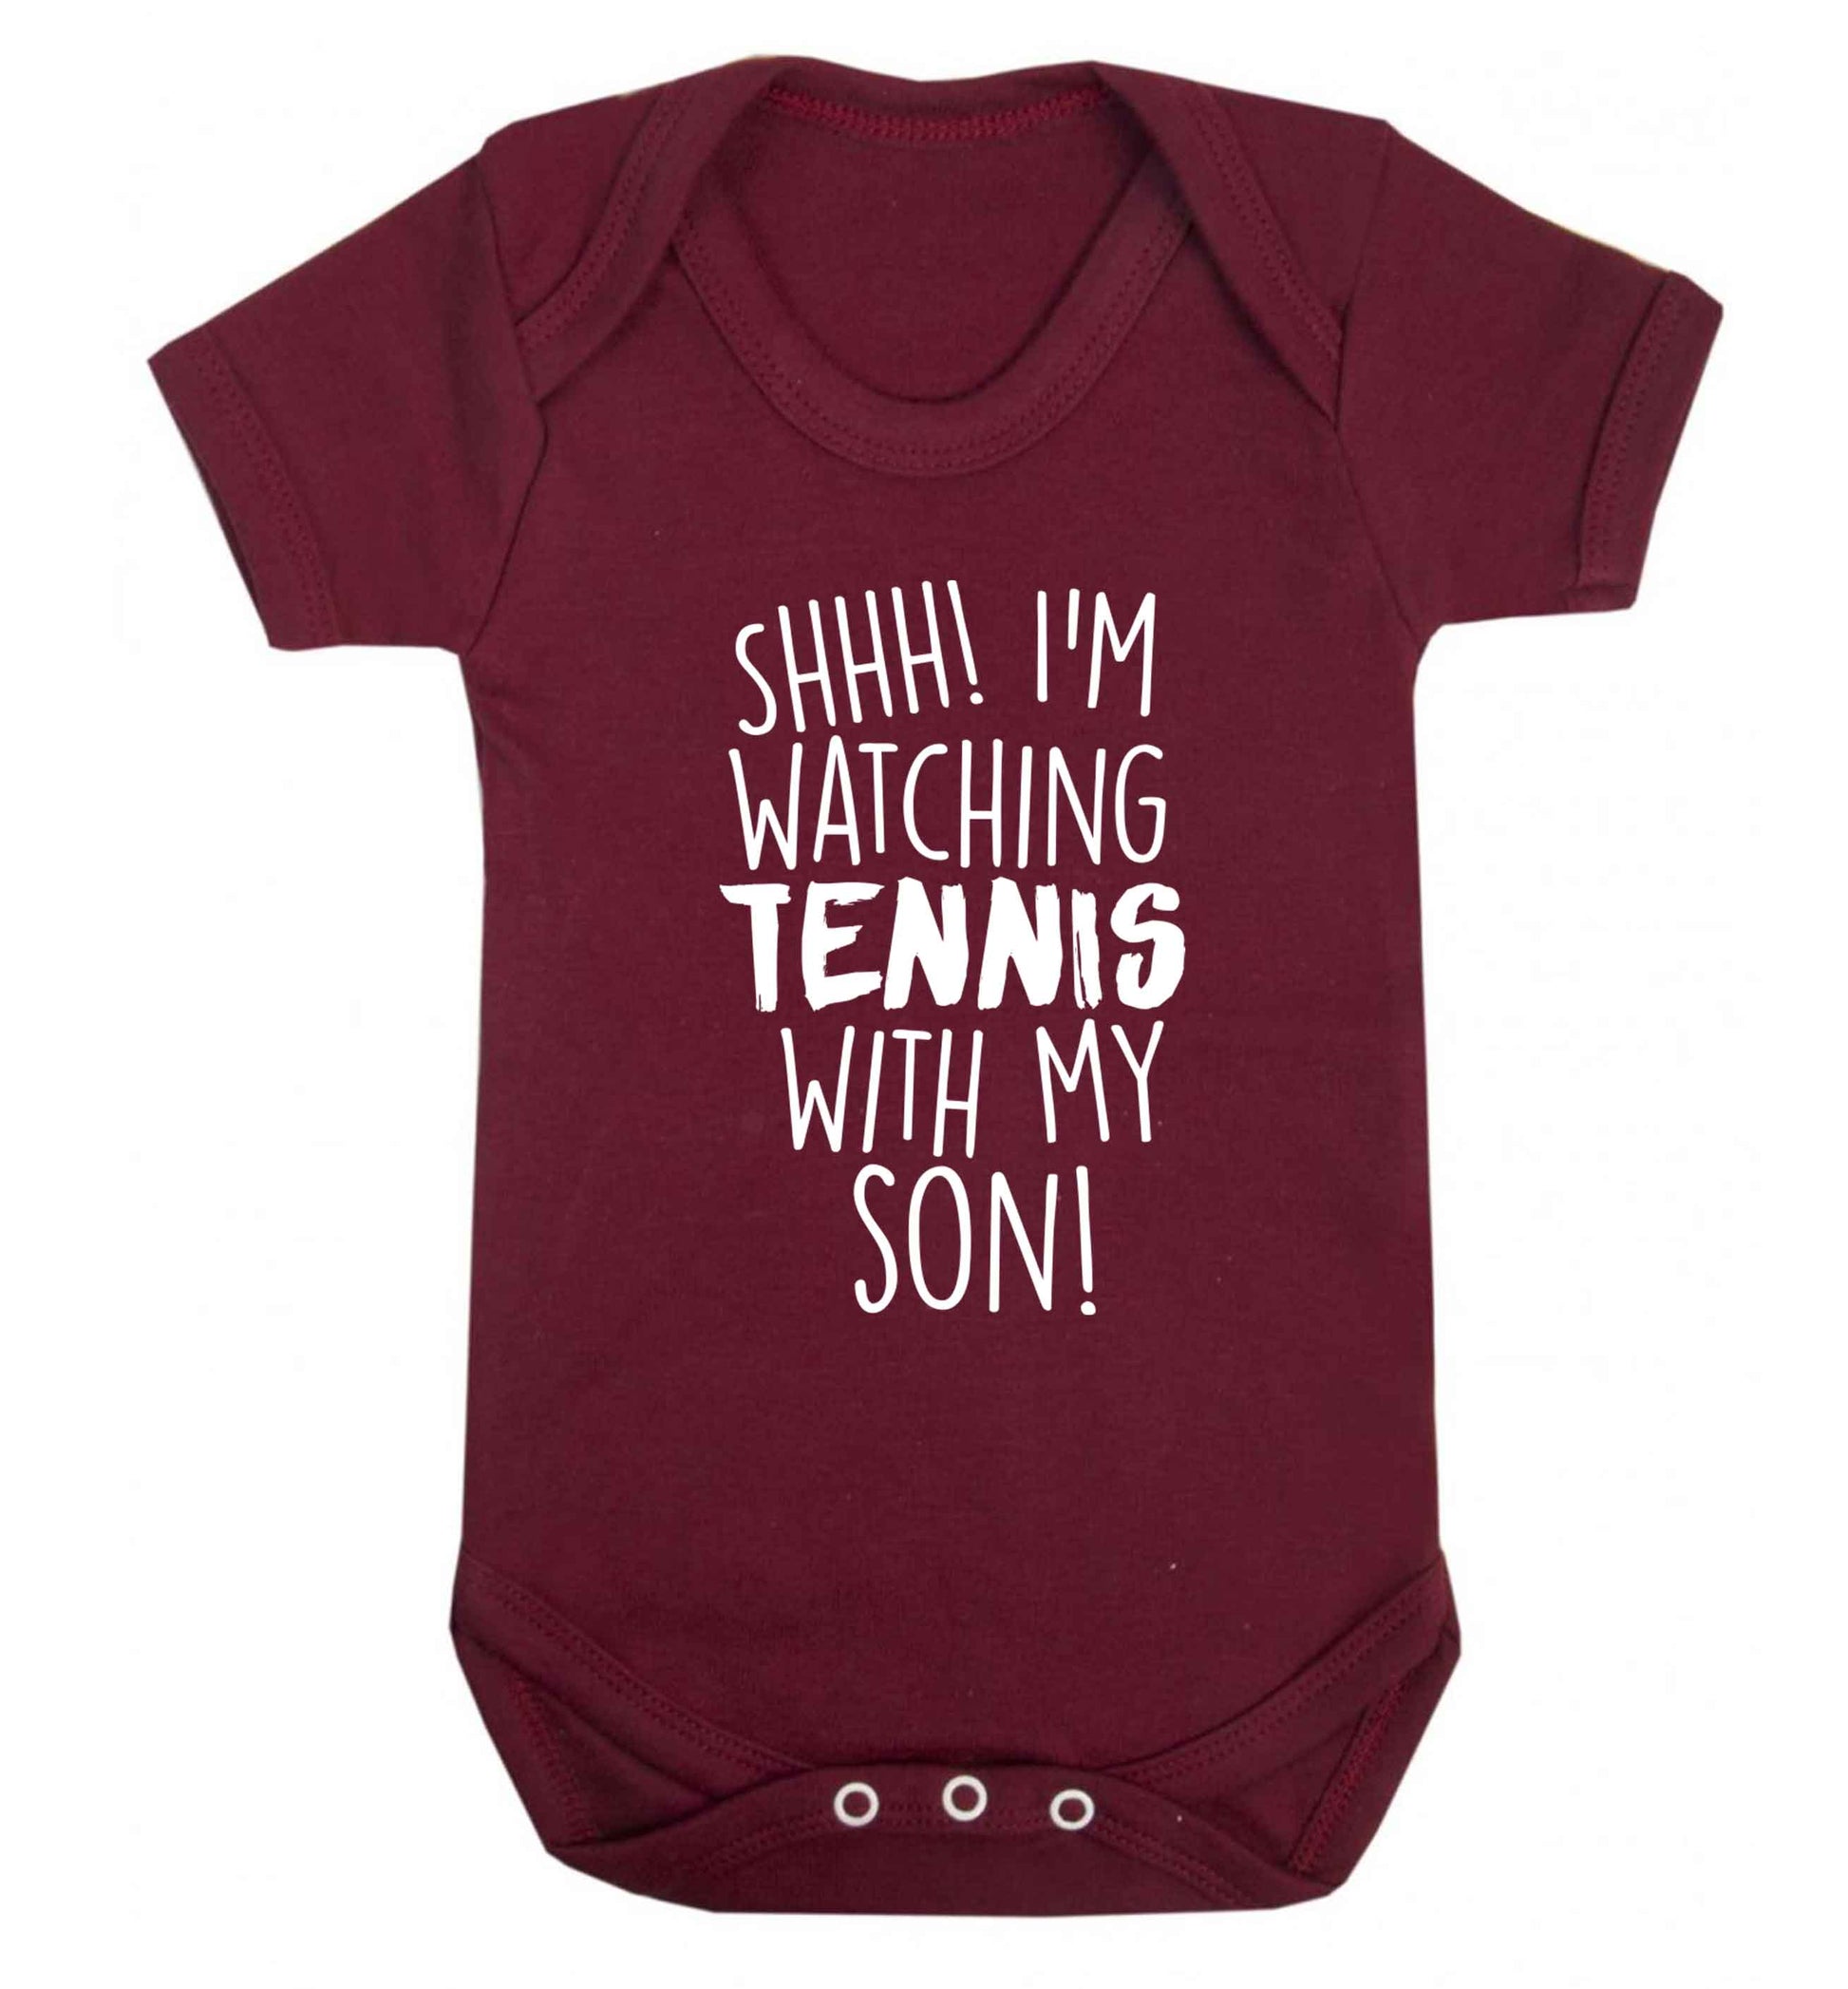 Shh! I'm watching tennis with my son! Baby Vest maroon 18-24 months